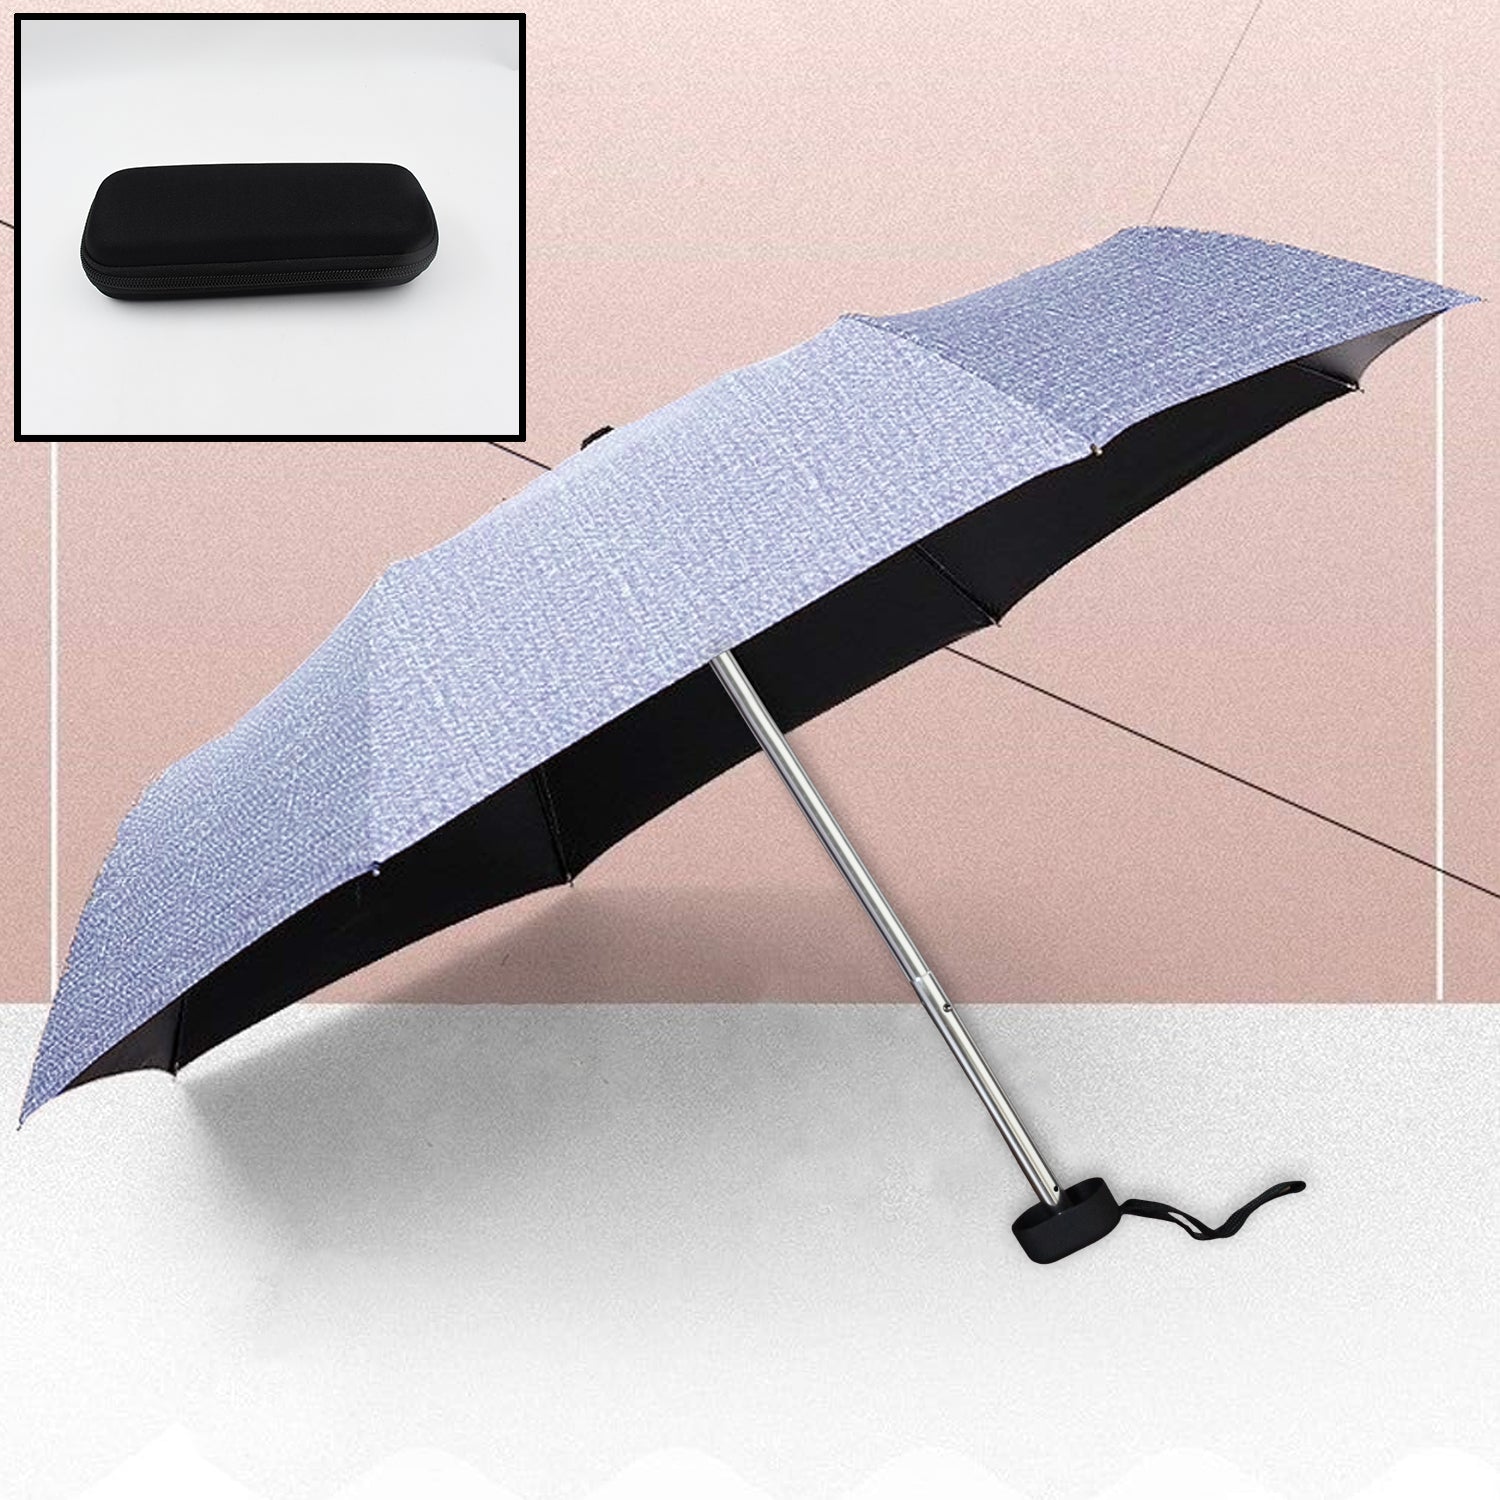 8562 3-Fold Umbrella Summer Sun and Rain Protection Foldable Cute Umbrella || UV Protection Rain Sun Umbrella || Travel Accessories || Umbrella for Children, Girls, and Boys (1 Pc / With Zip Case) 